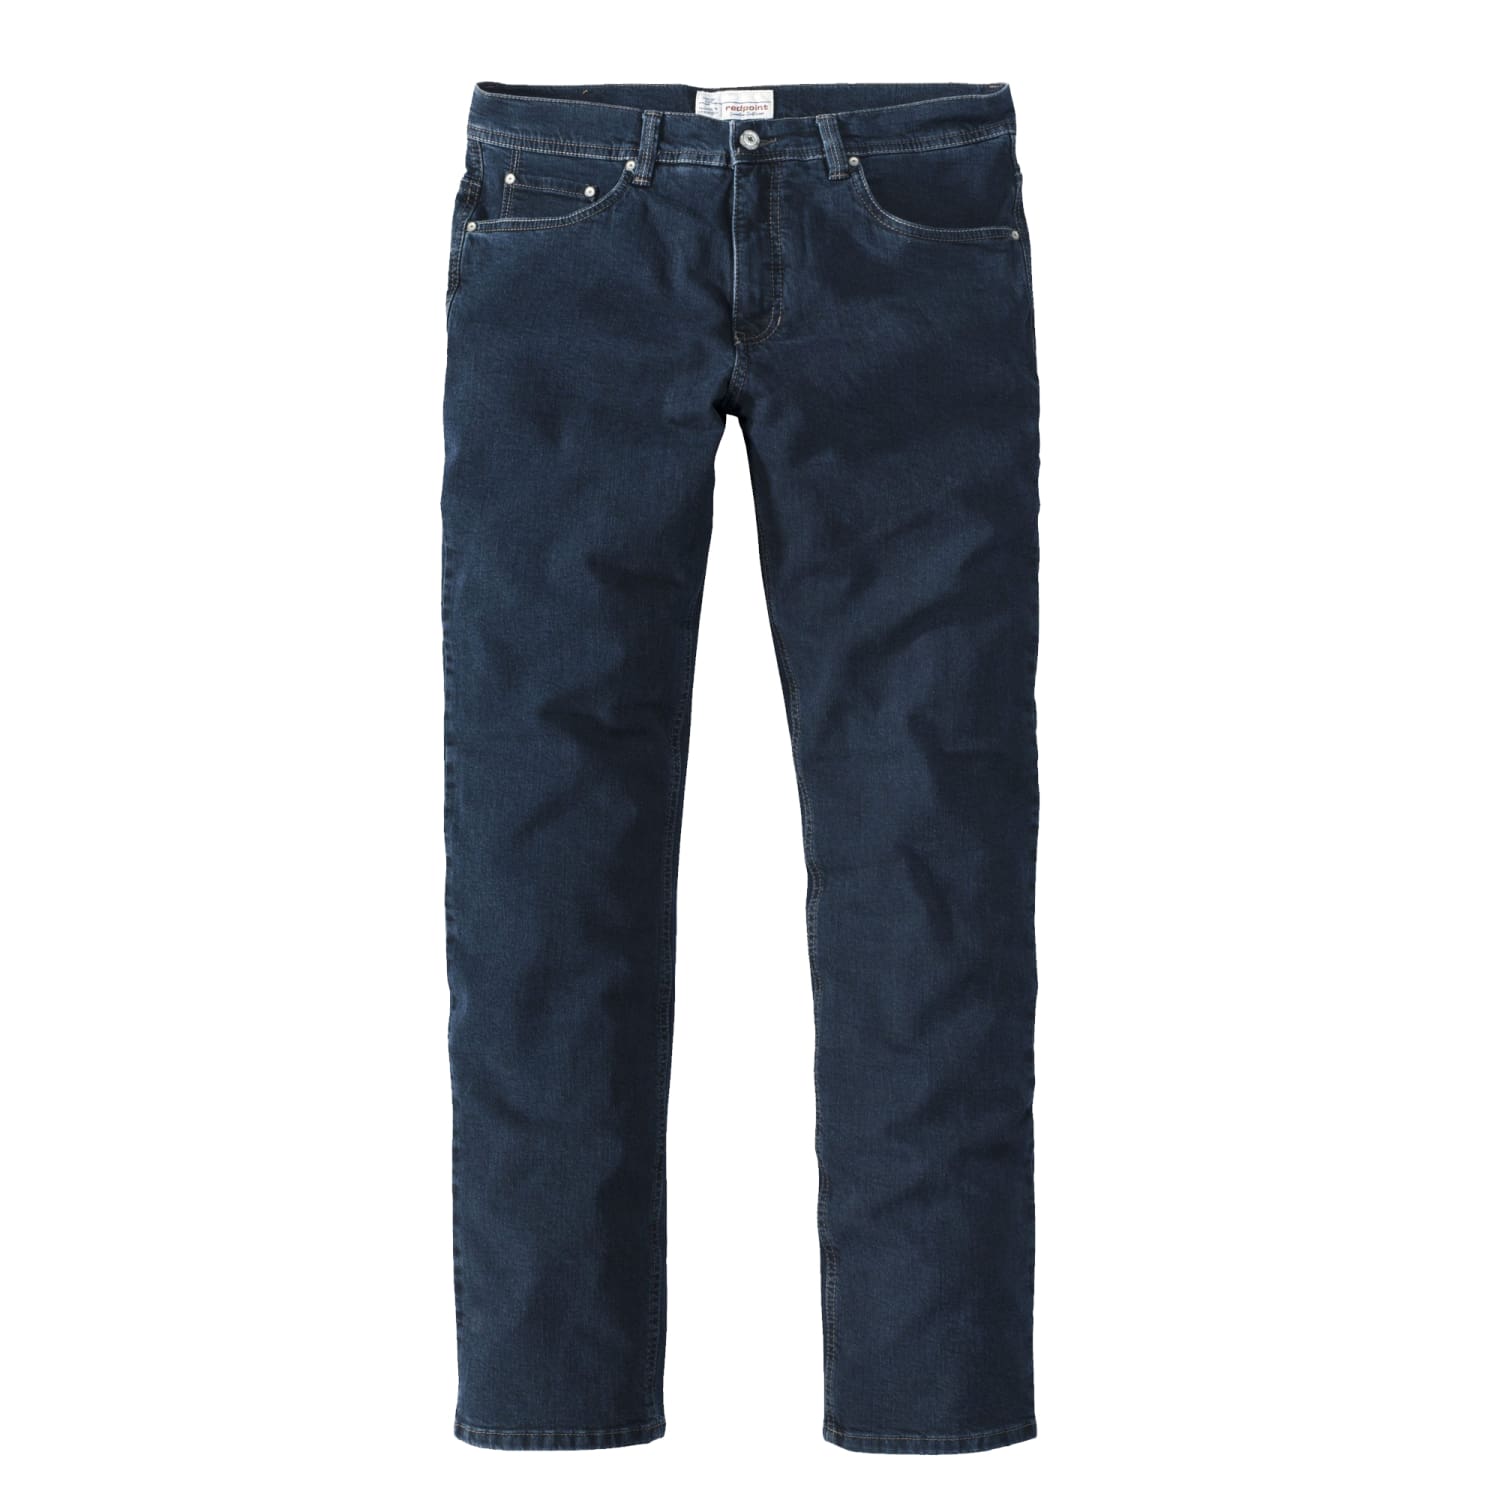 Redpoint Jeans - Langley - Navy 1